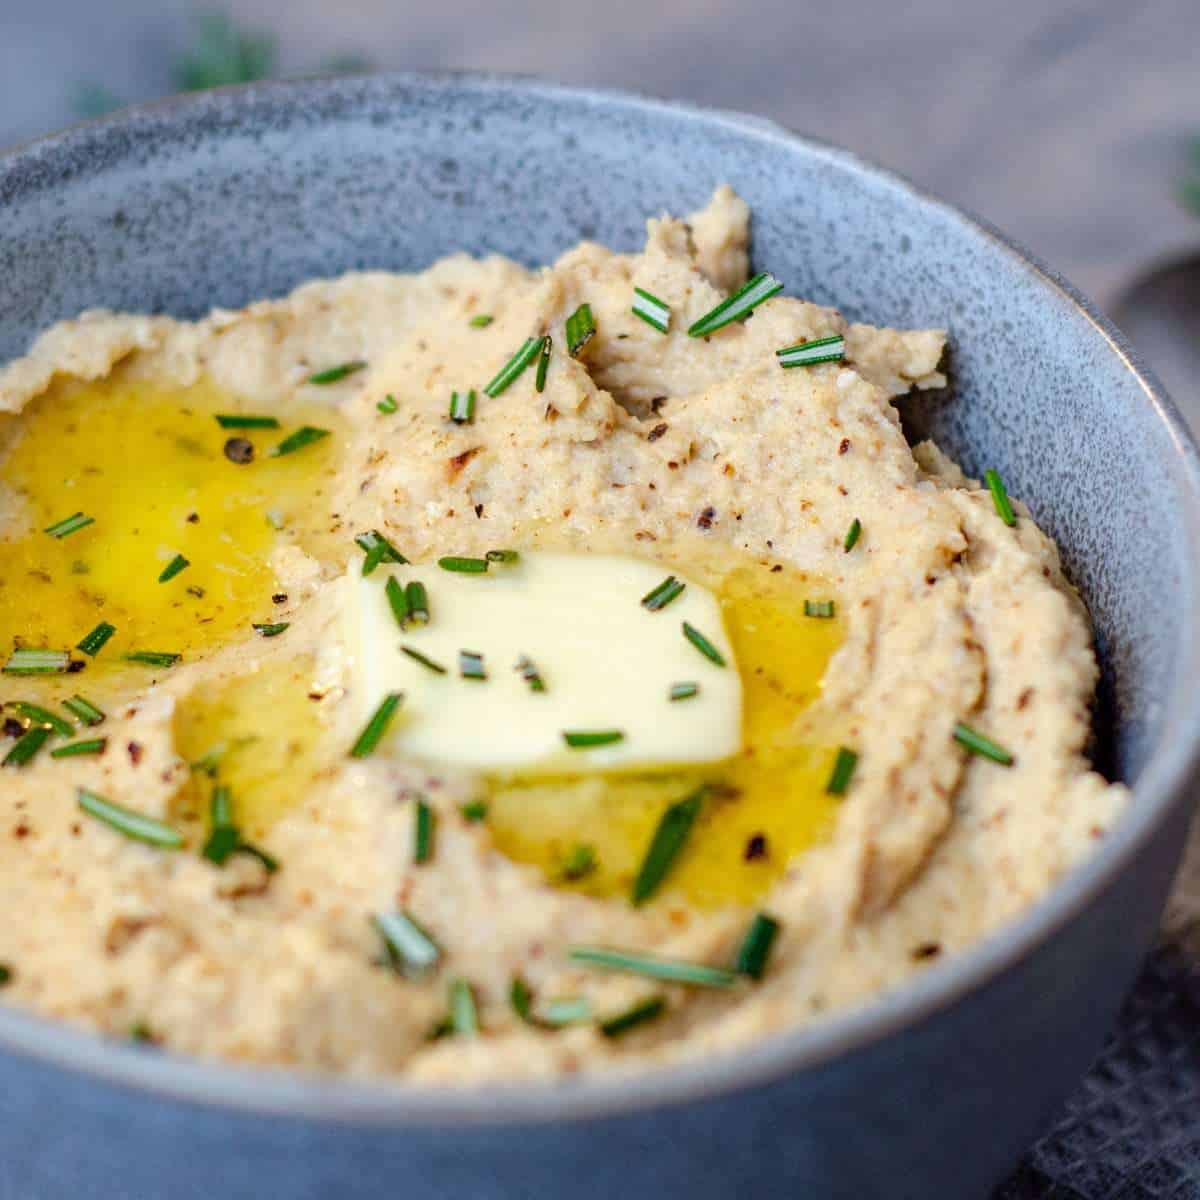 Cauliflower mash topped with rosemary and melted butter